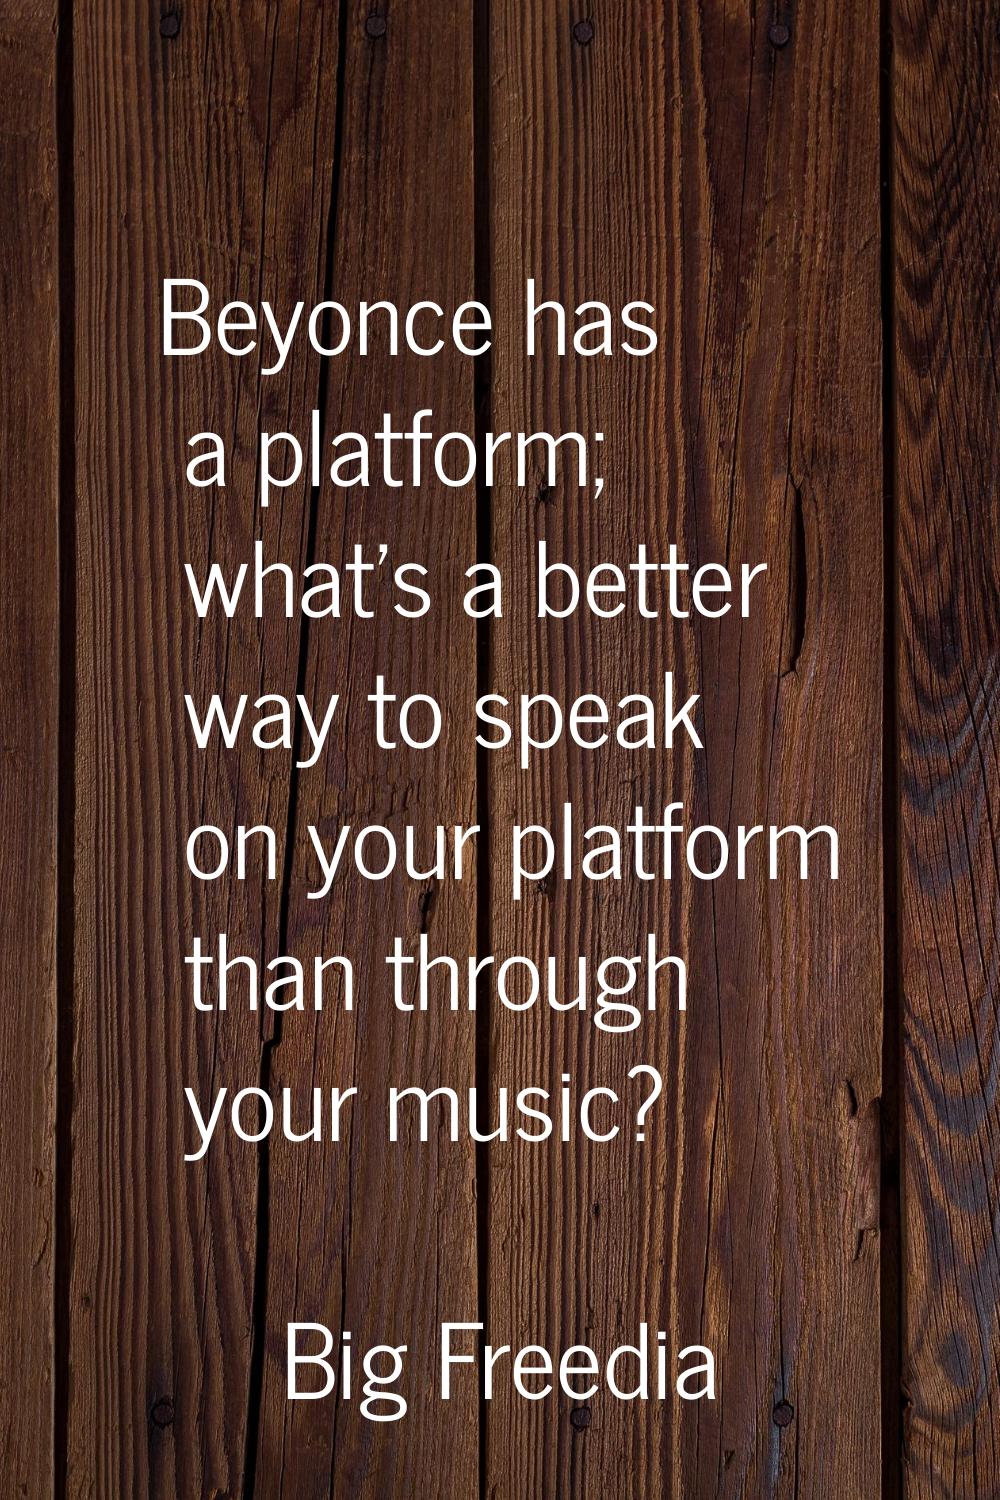 Beyonce has a platform; what's a better way to speak on your platform than through your music?